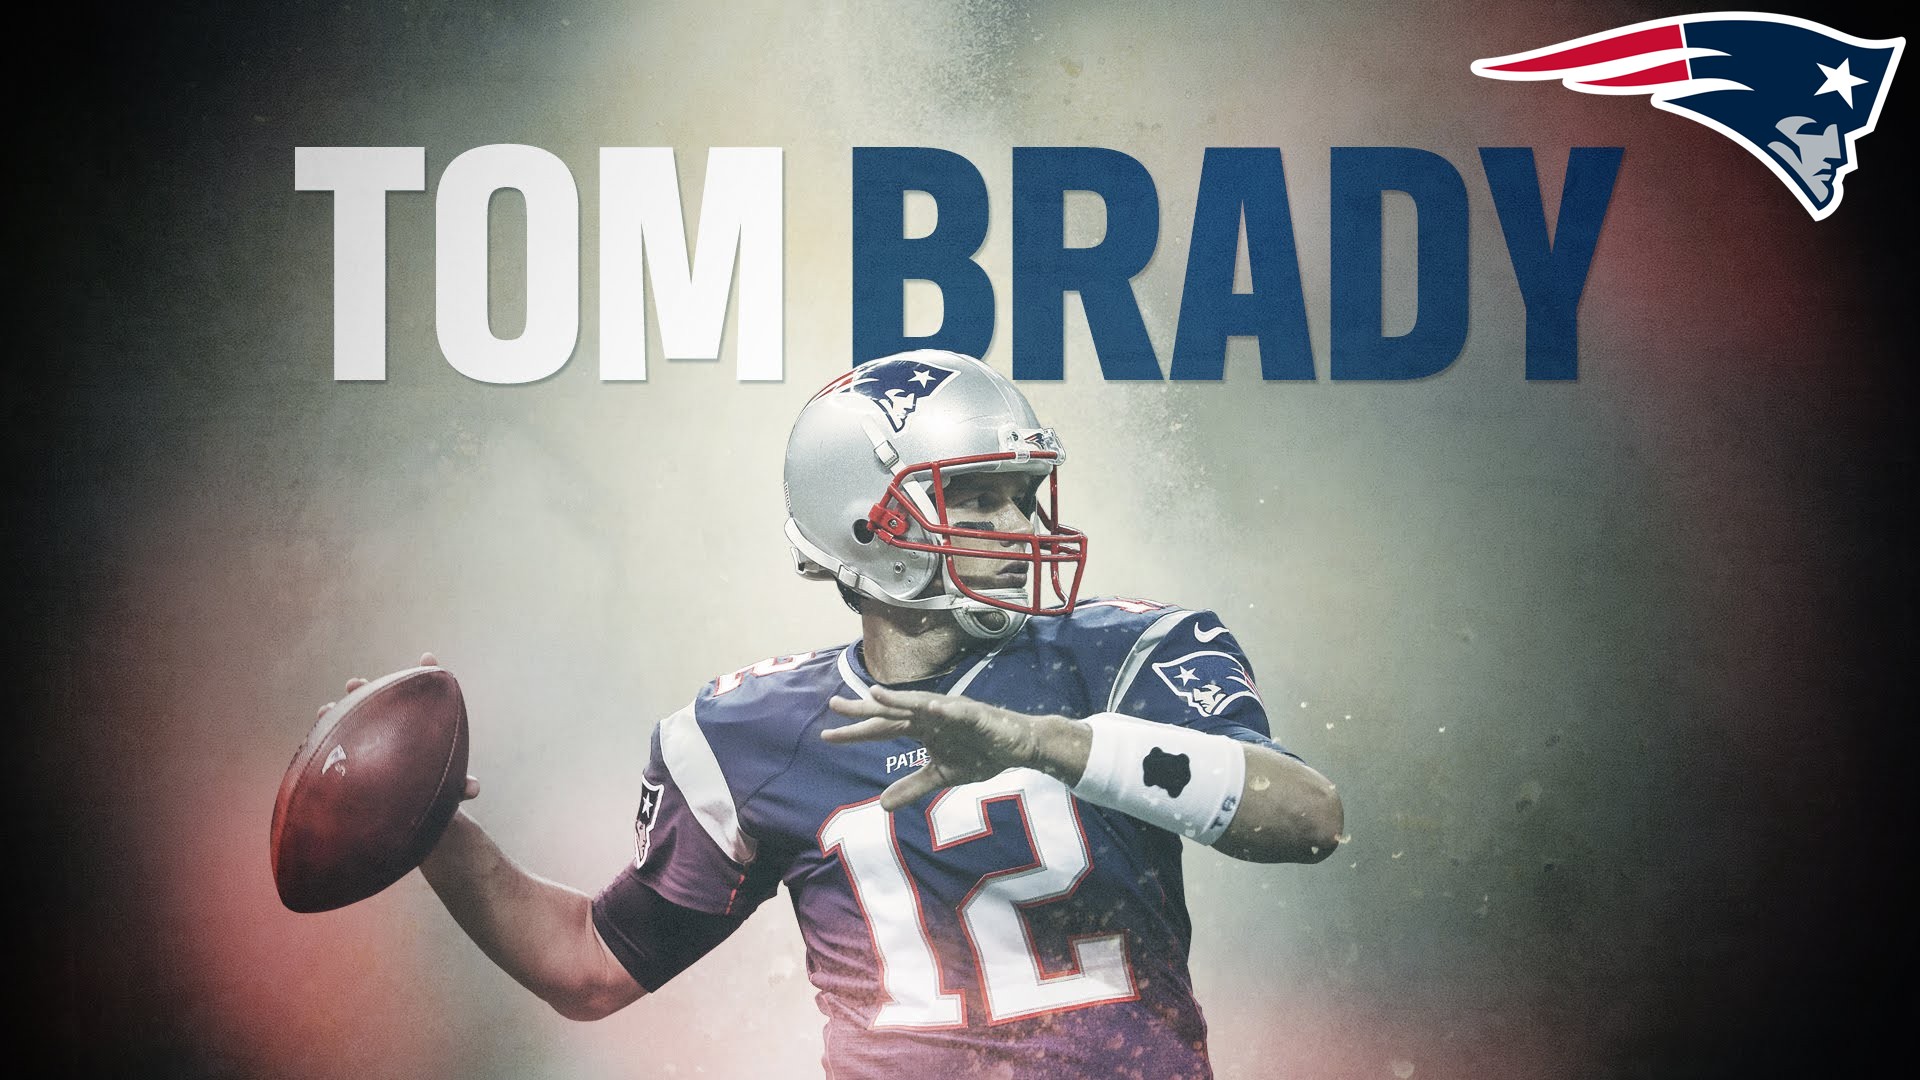 Wallpapers HD Tom Brady with resolution 1920x1080 pixel. You can make this wallpaper for your Mac or Windows Desktop Background, iPhone, Android or Tablet and another Smartphone device